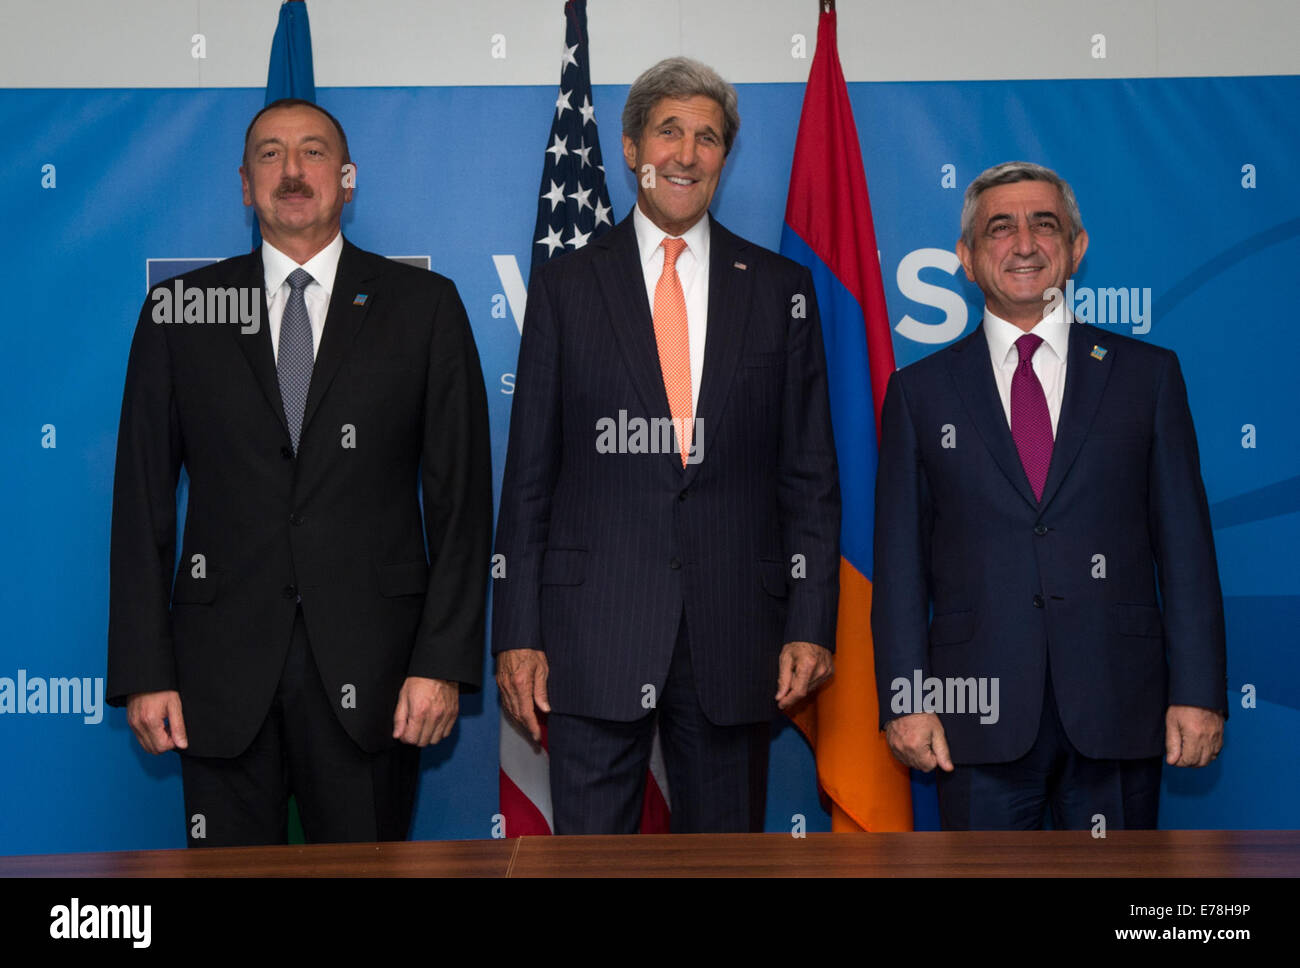 Secretary Kerry Holds Trilateral Meeting With Presidents of Azerbaijan and Armenia at NATO Summit in Wales U.S. Secretary of Sta Stock Photo